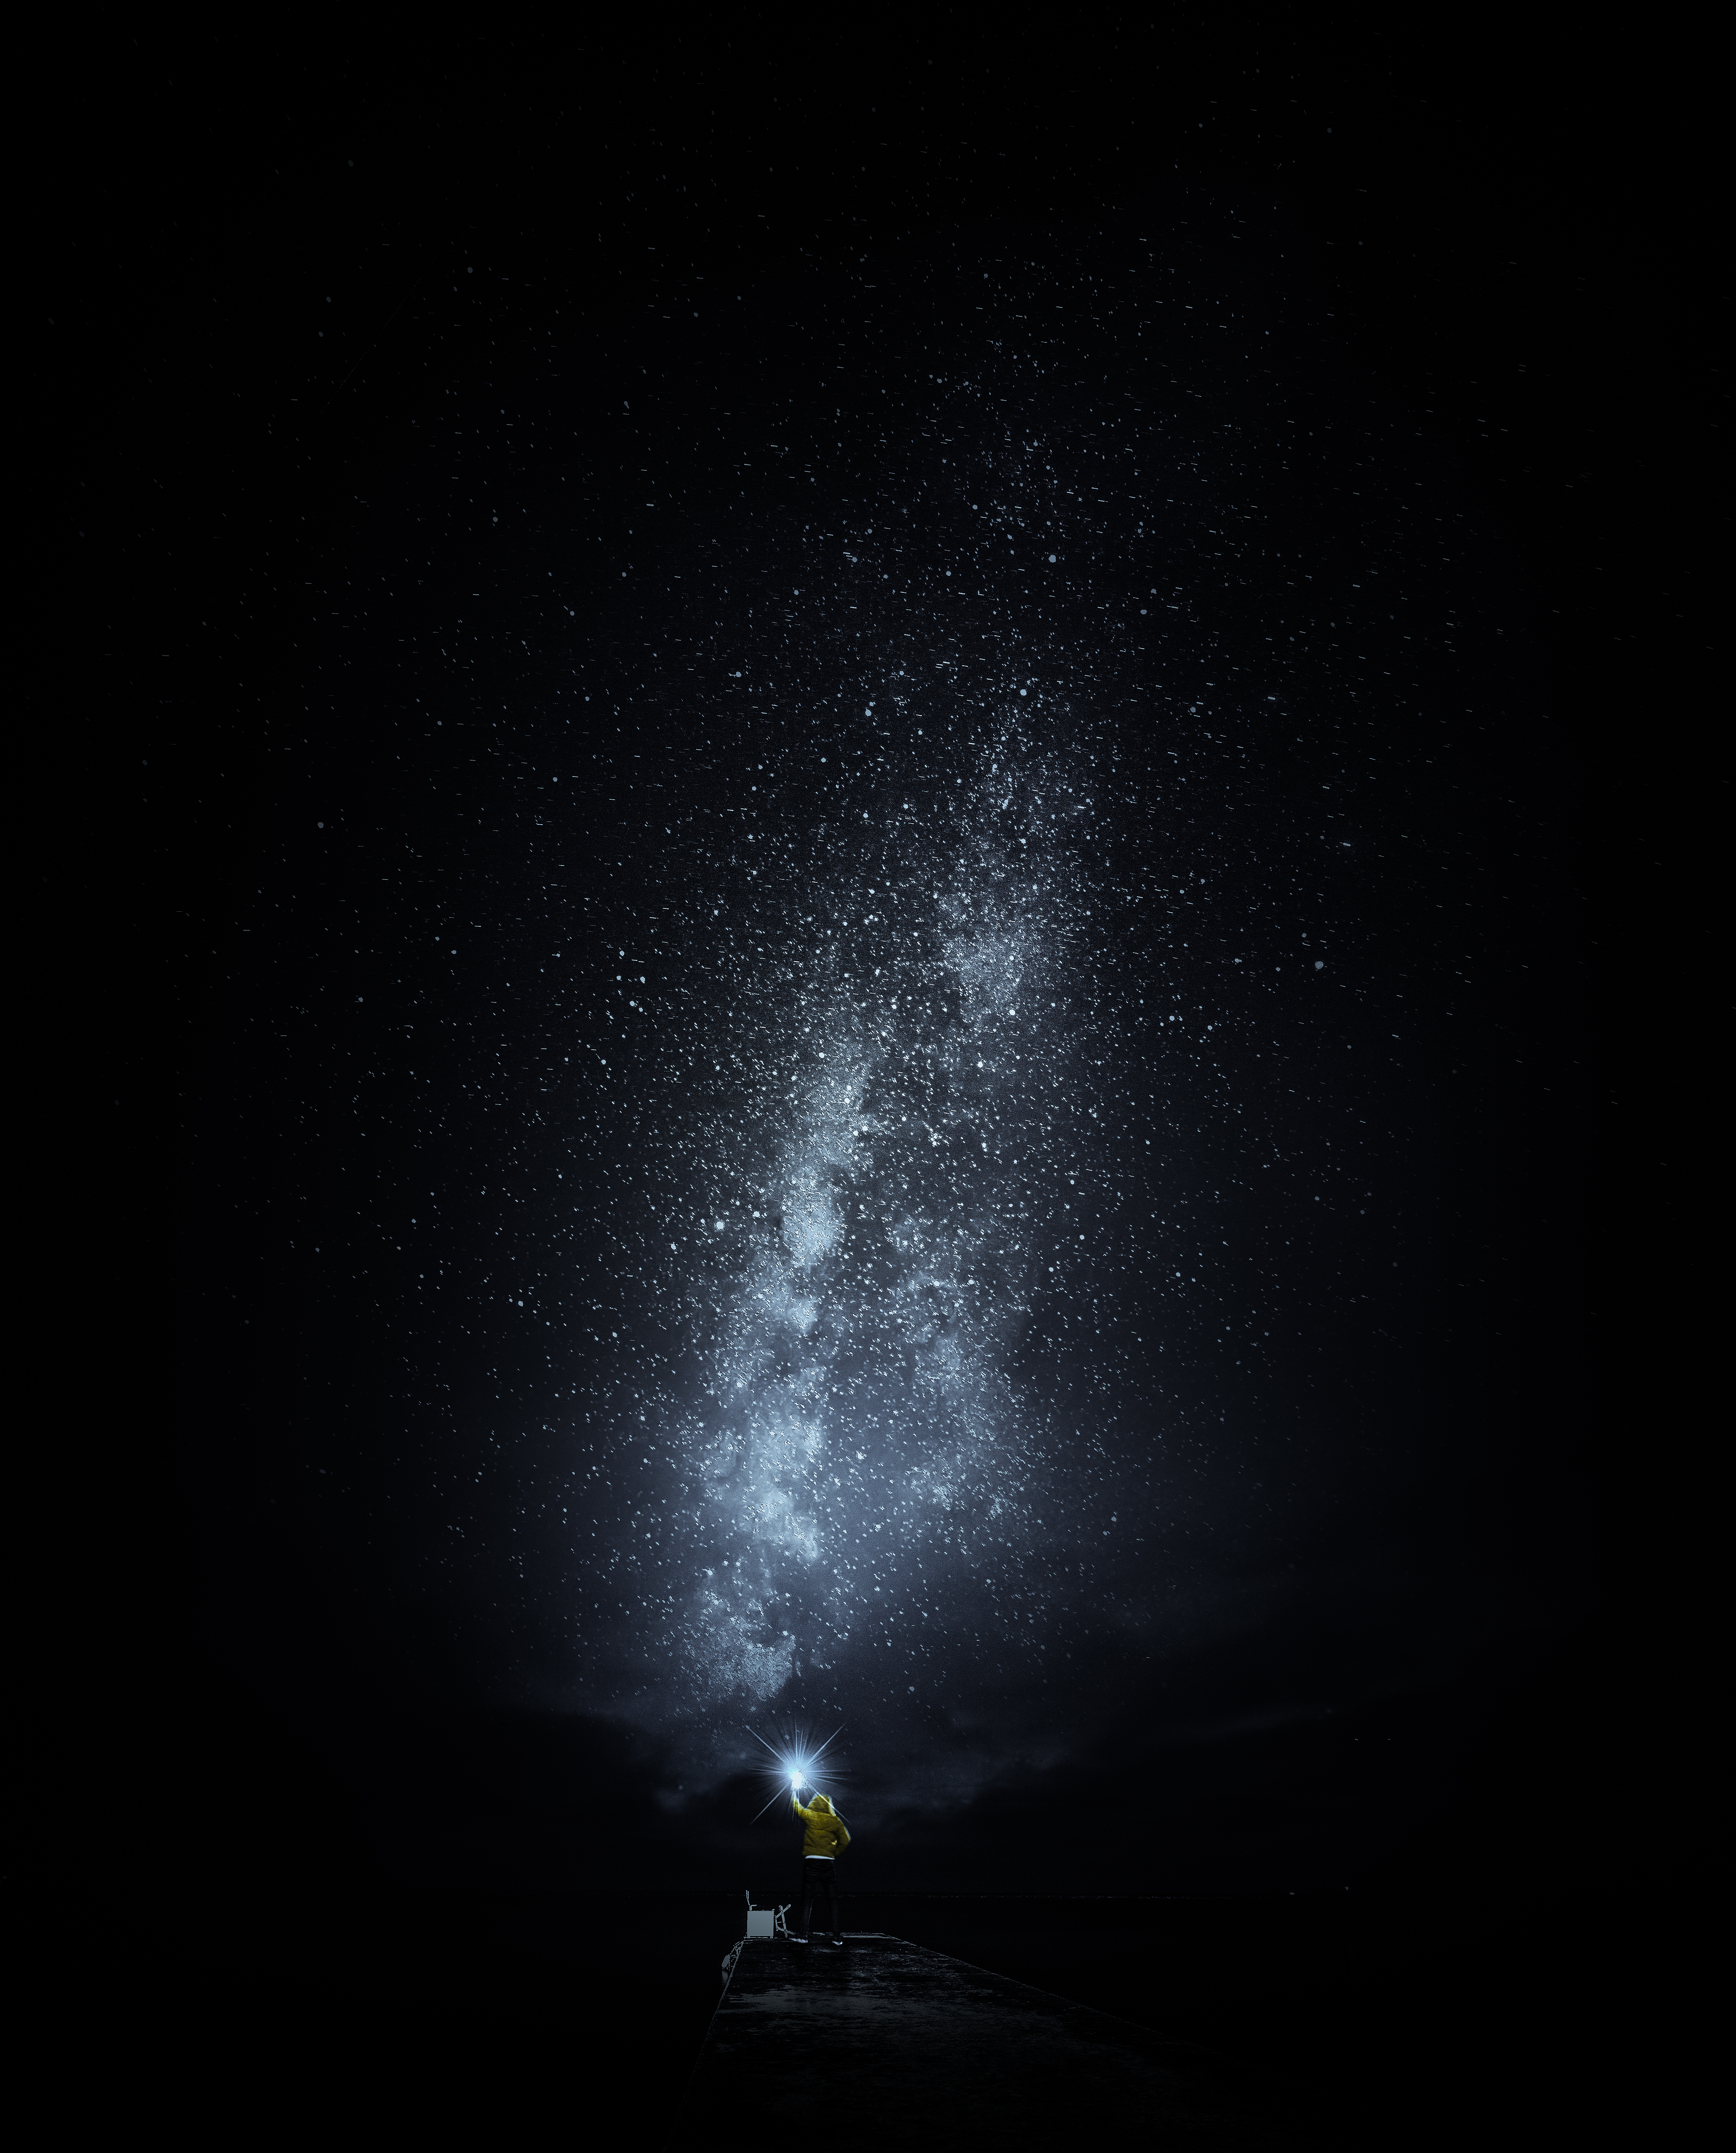 lonely, human, night, dark, shine, starry sky, brilliance, person, loneliness, alone